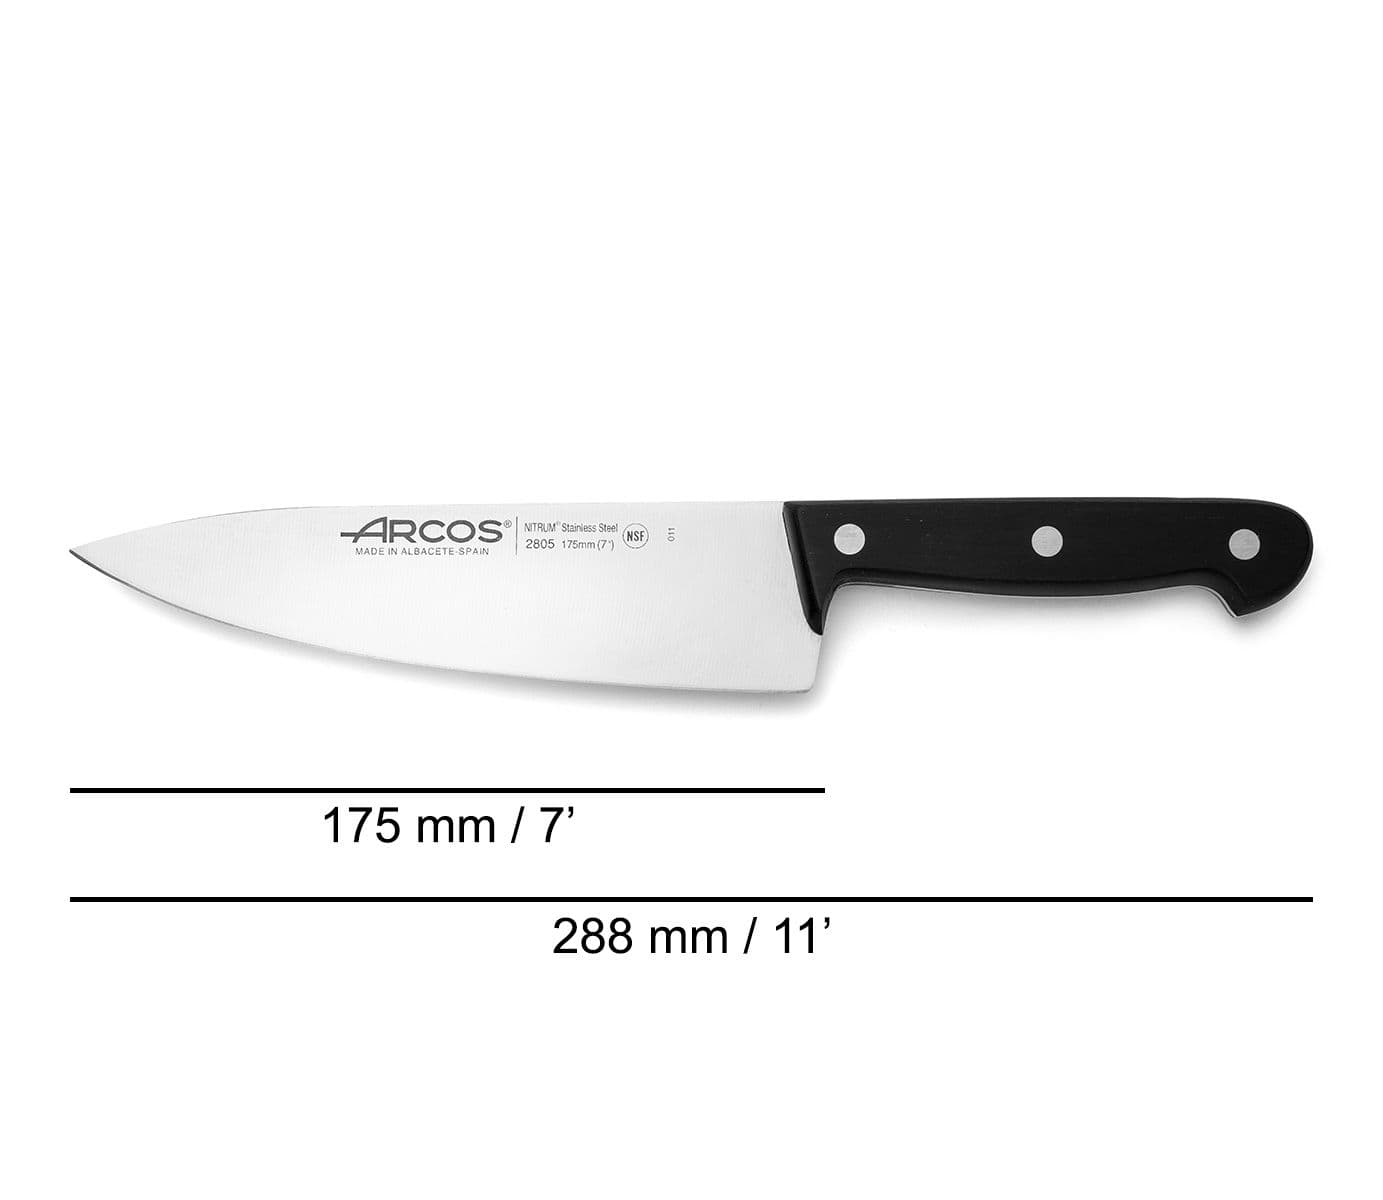 Large Chef Knife 7.00 Fixed Blade - Kitchen Cutlery